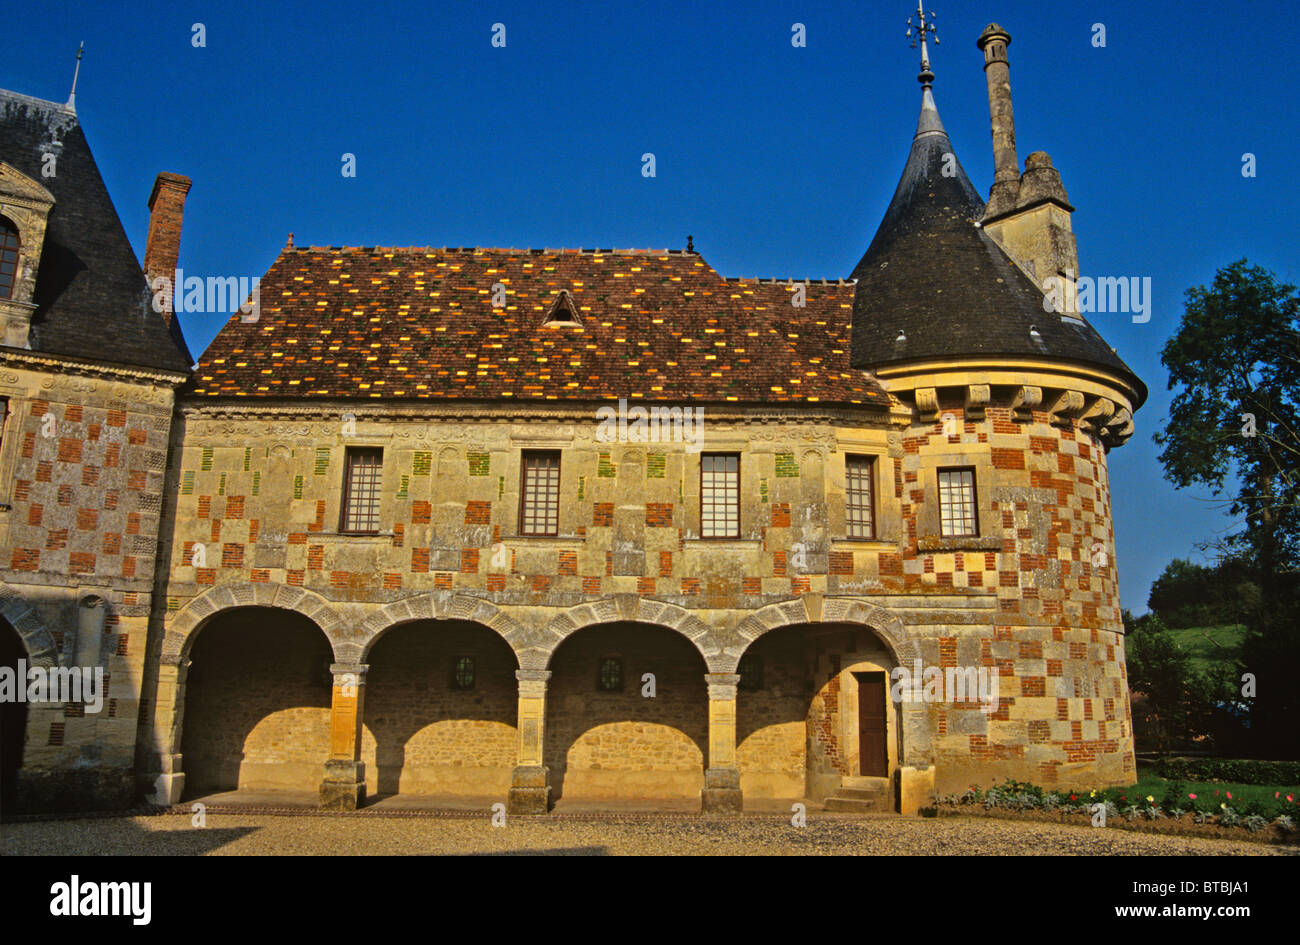 Traditional Normandy architecture and building Stock Photo - Alamy